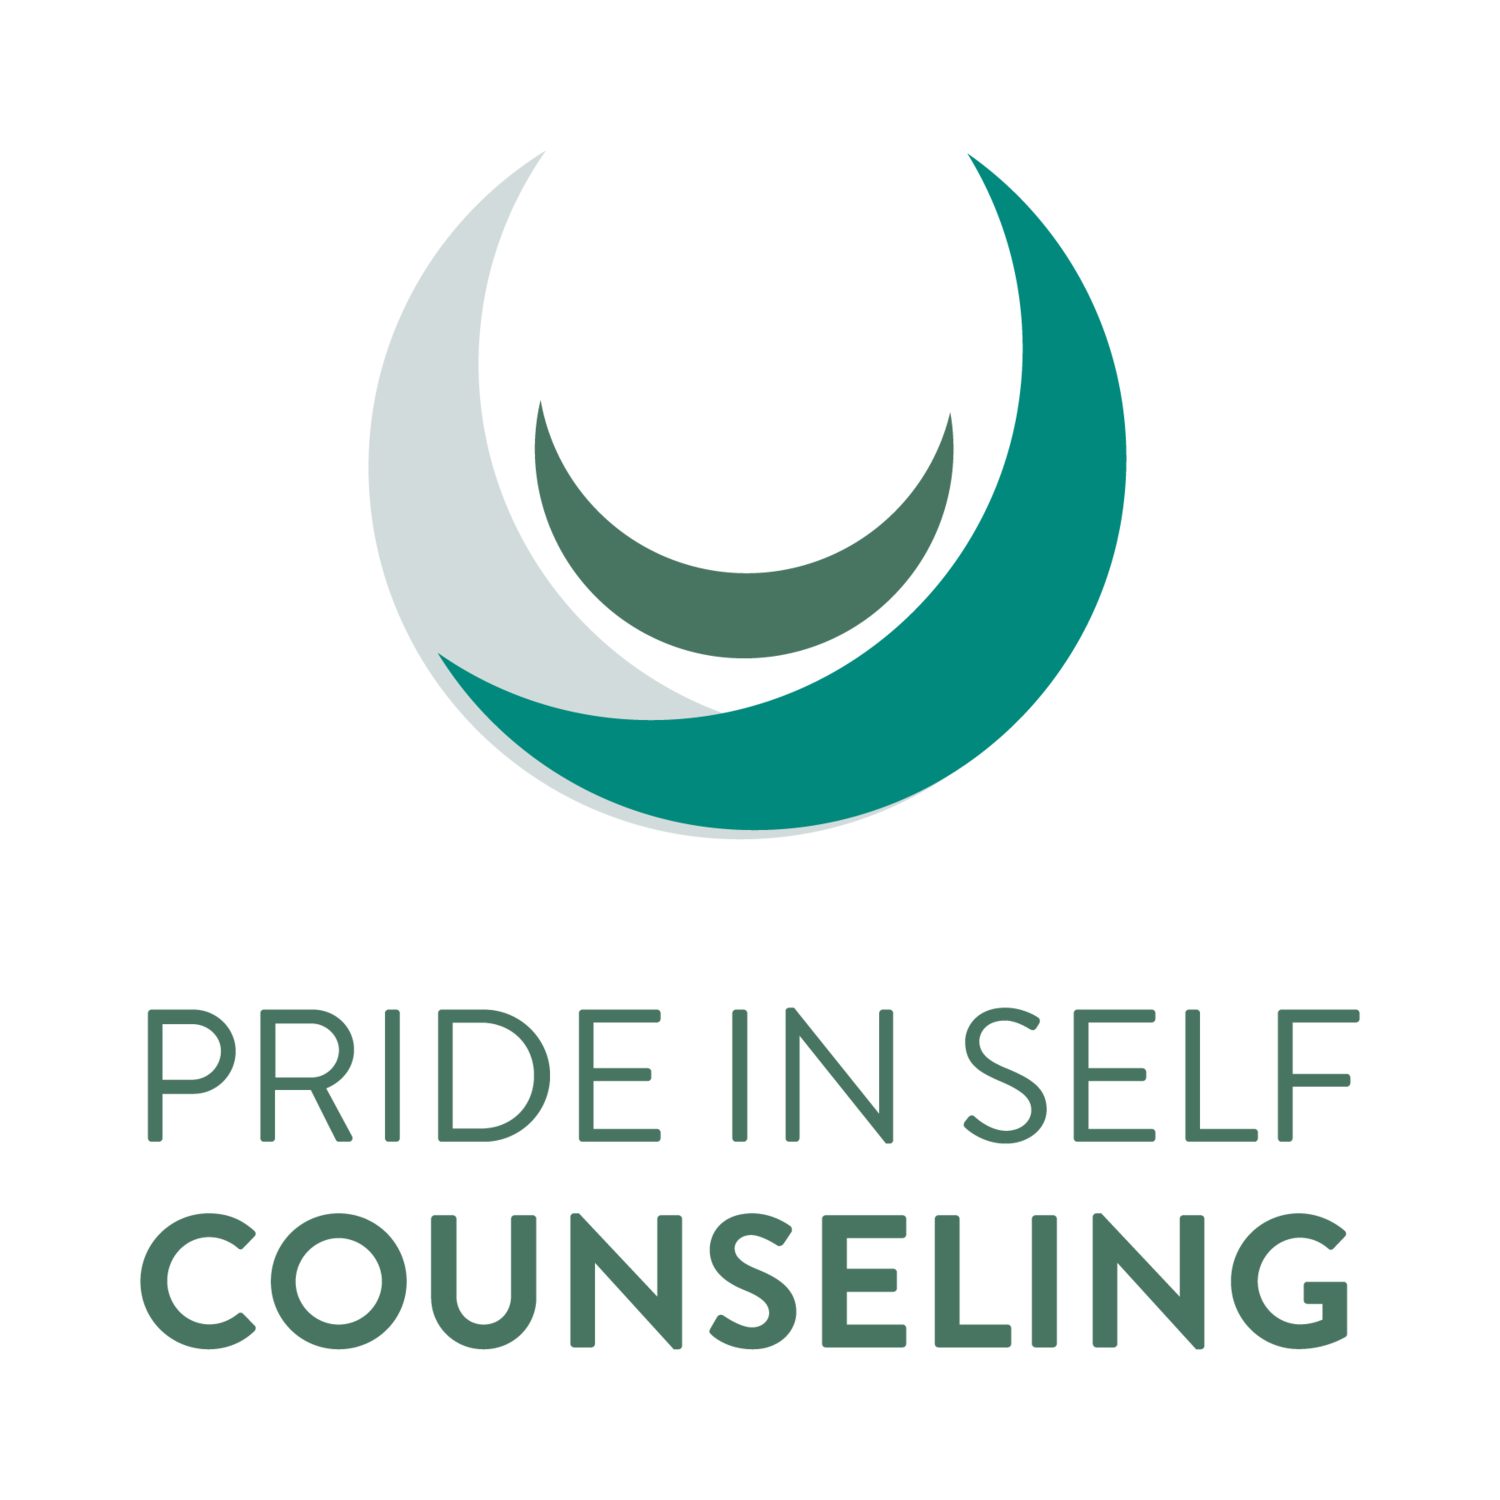 Pride in Self Counseling